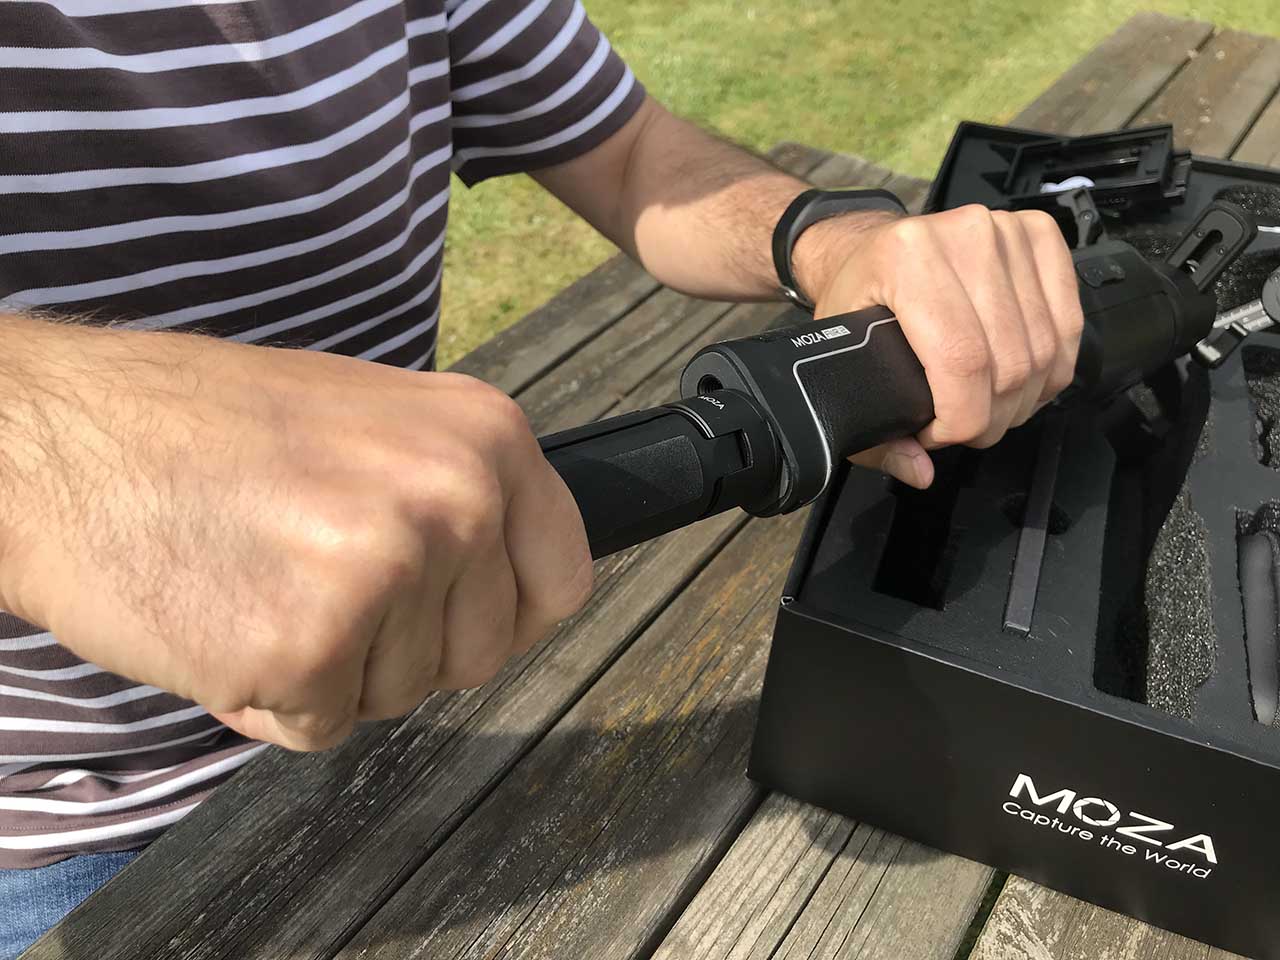 How to balance your camera on the Gudsen Moza Air 2: 01 attach mini tripod